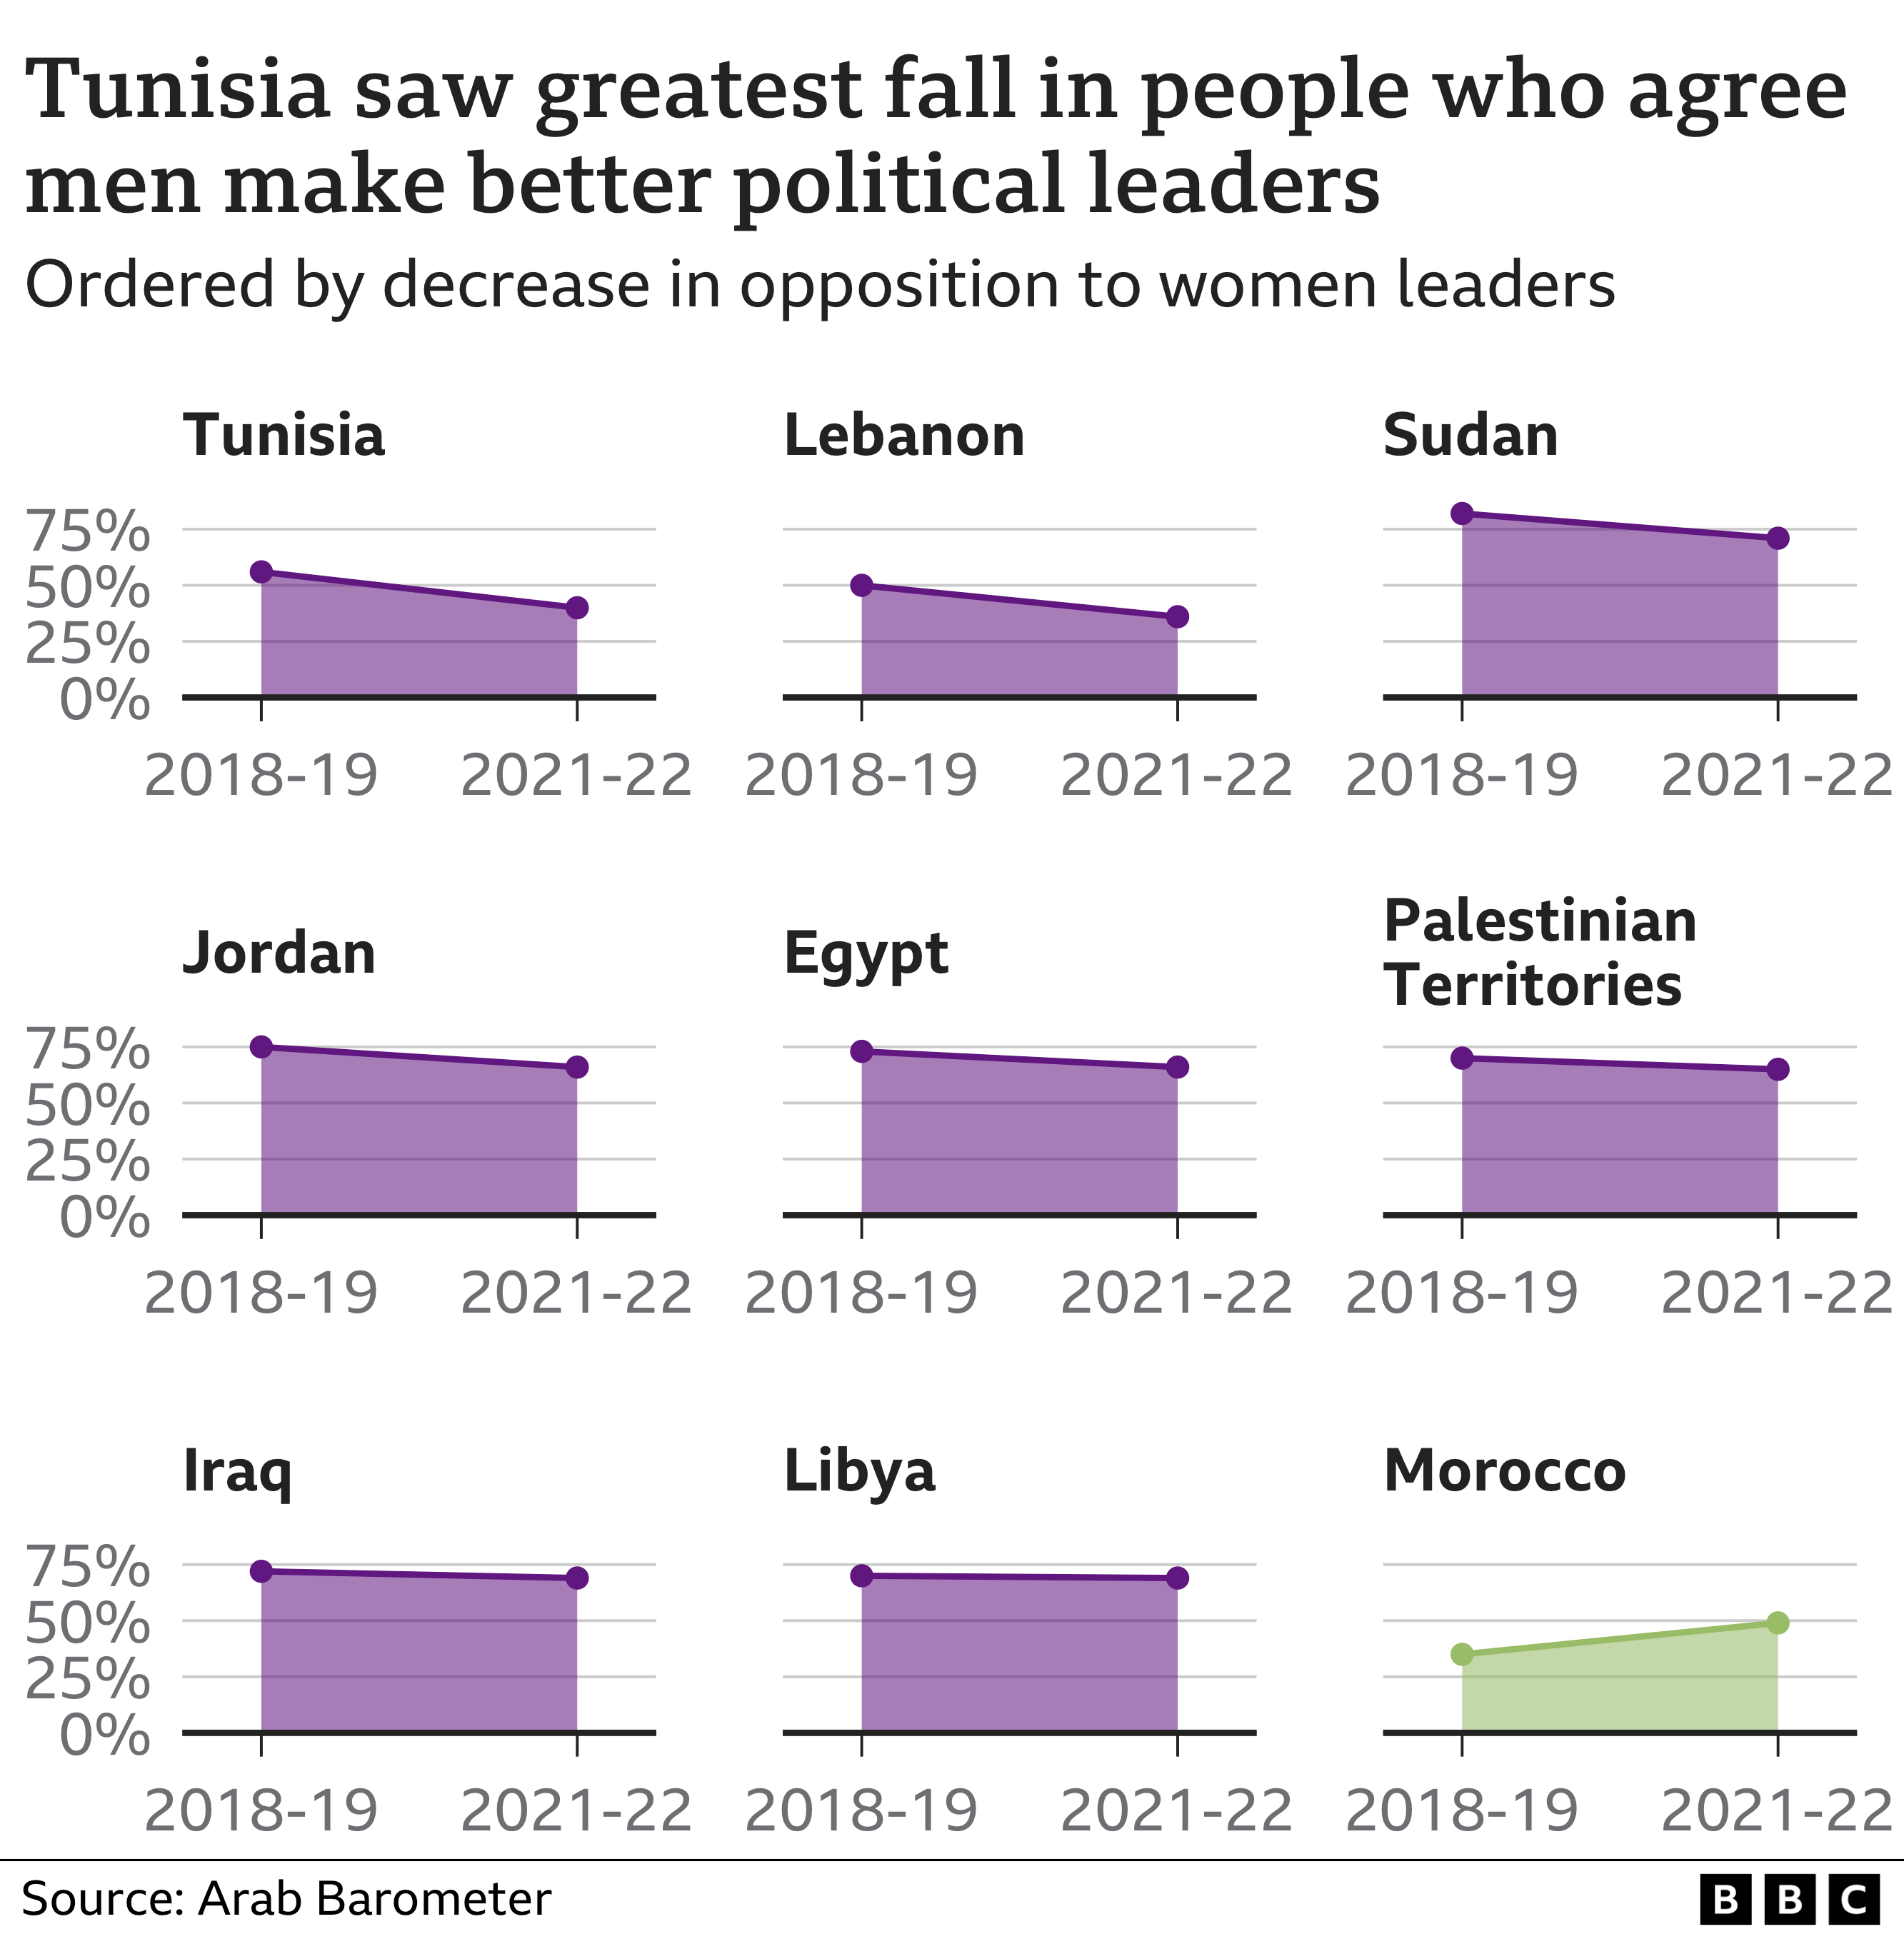 Chart showing the change in the proportion of people who believe that men make better political leaders. The greatest decline is in Tunisia, whereas Morocco has the only rise in the region.